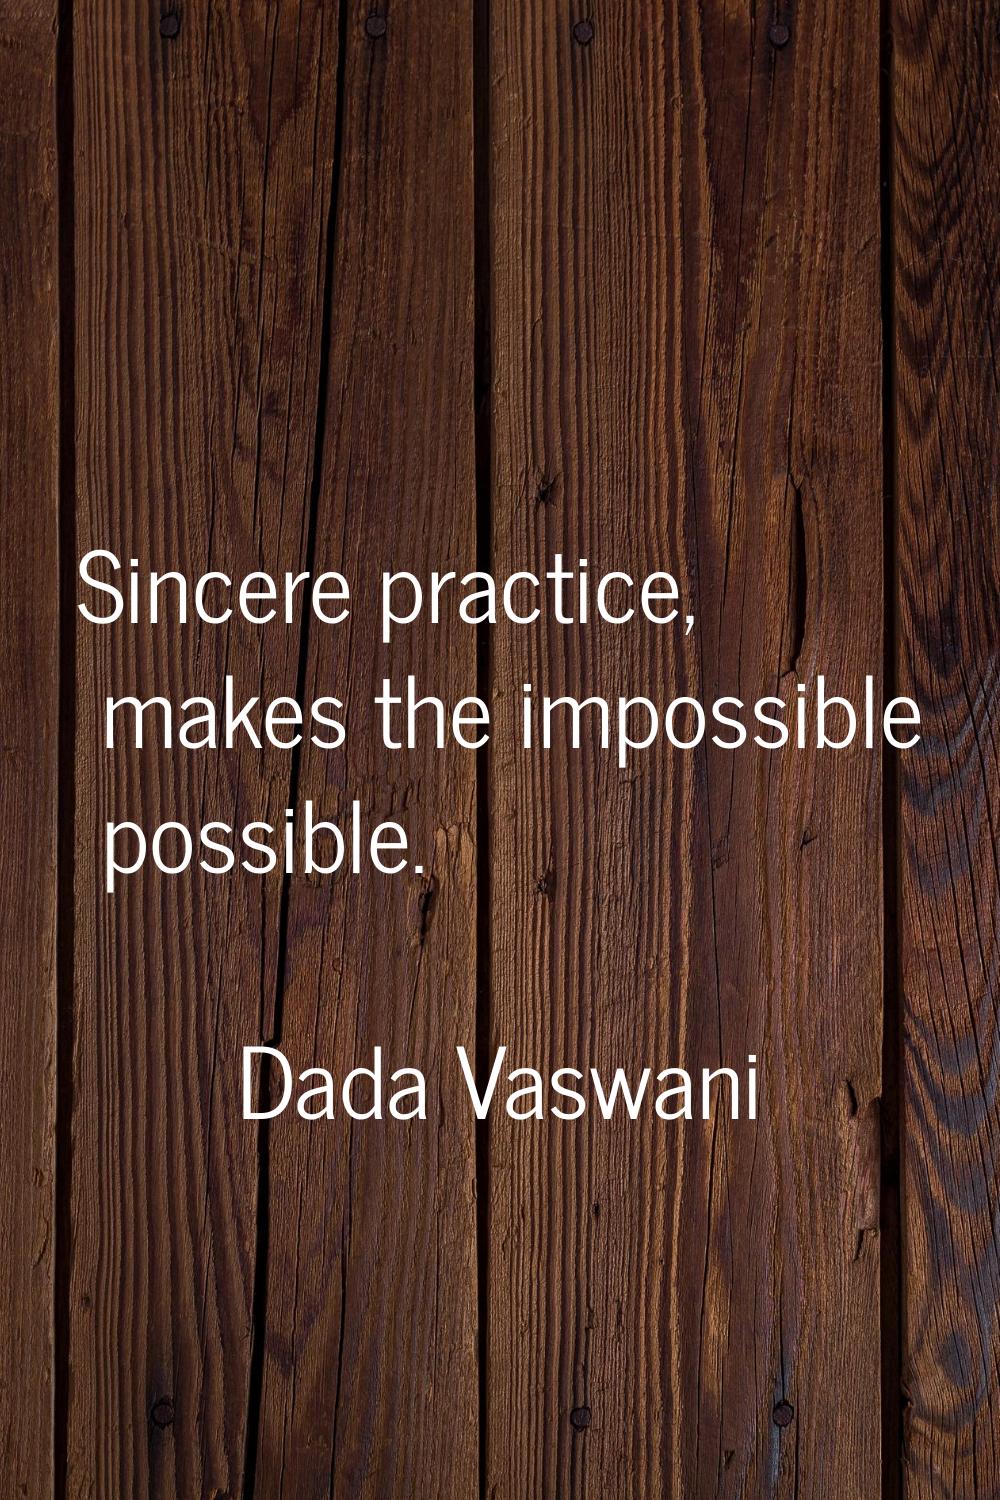 Sincere practice, makes the impossible possible.